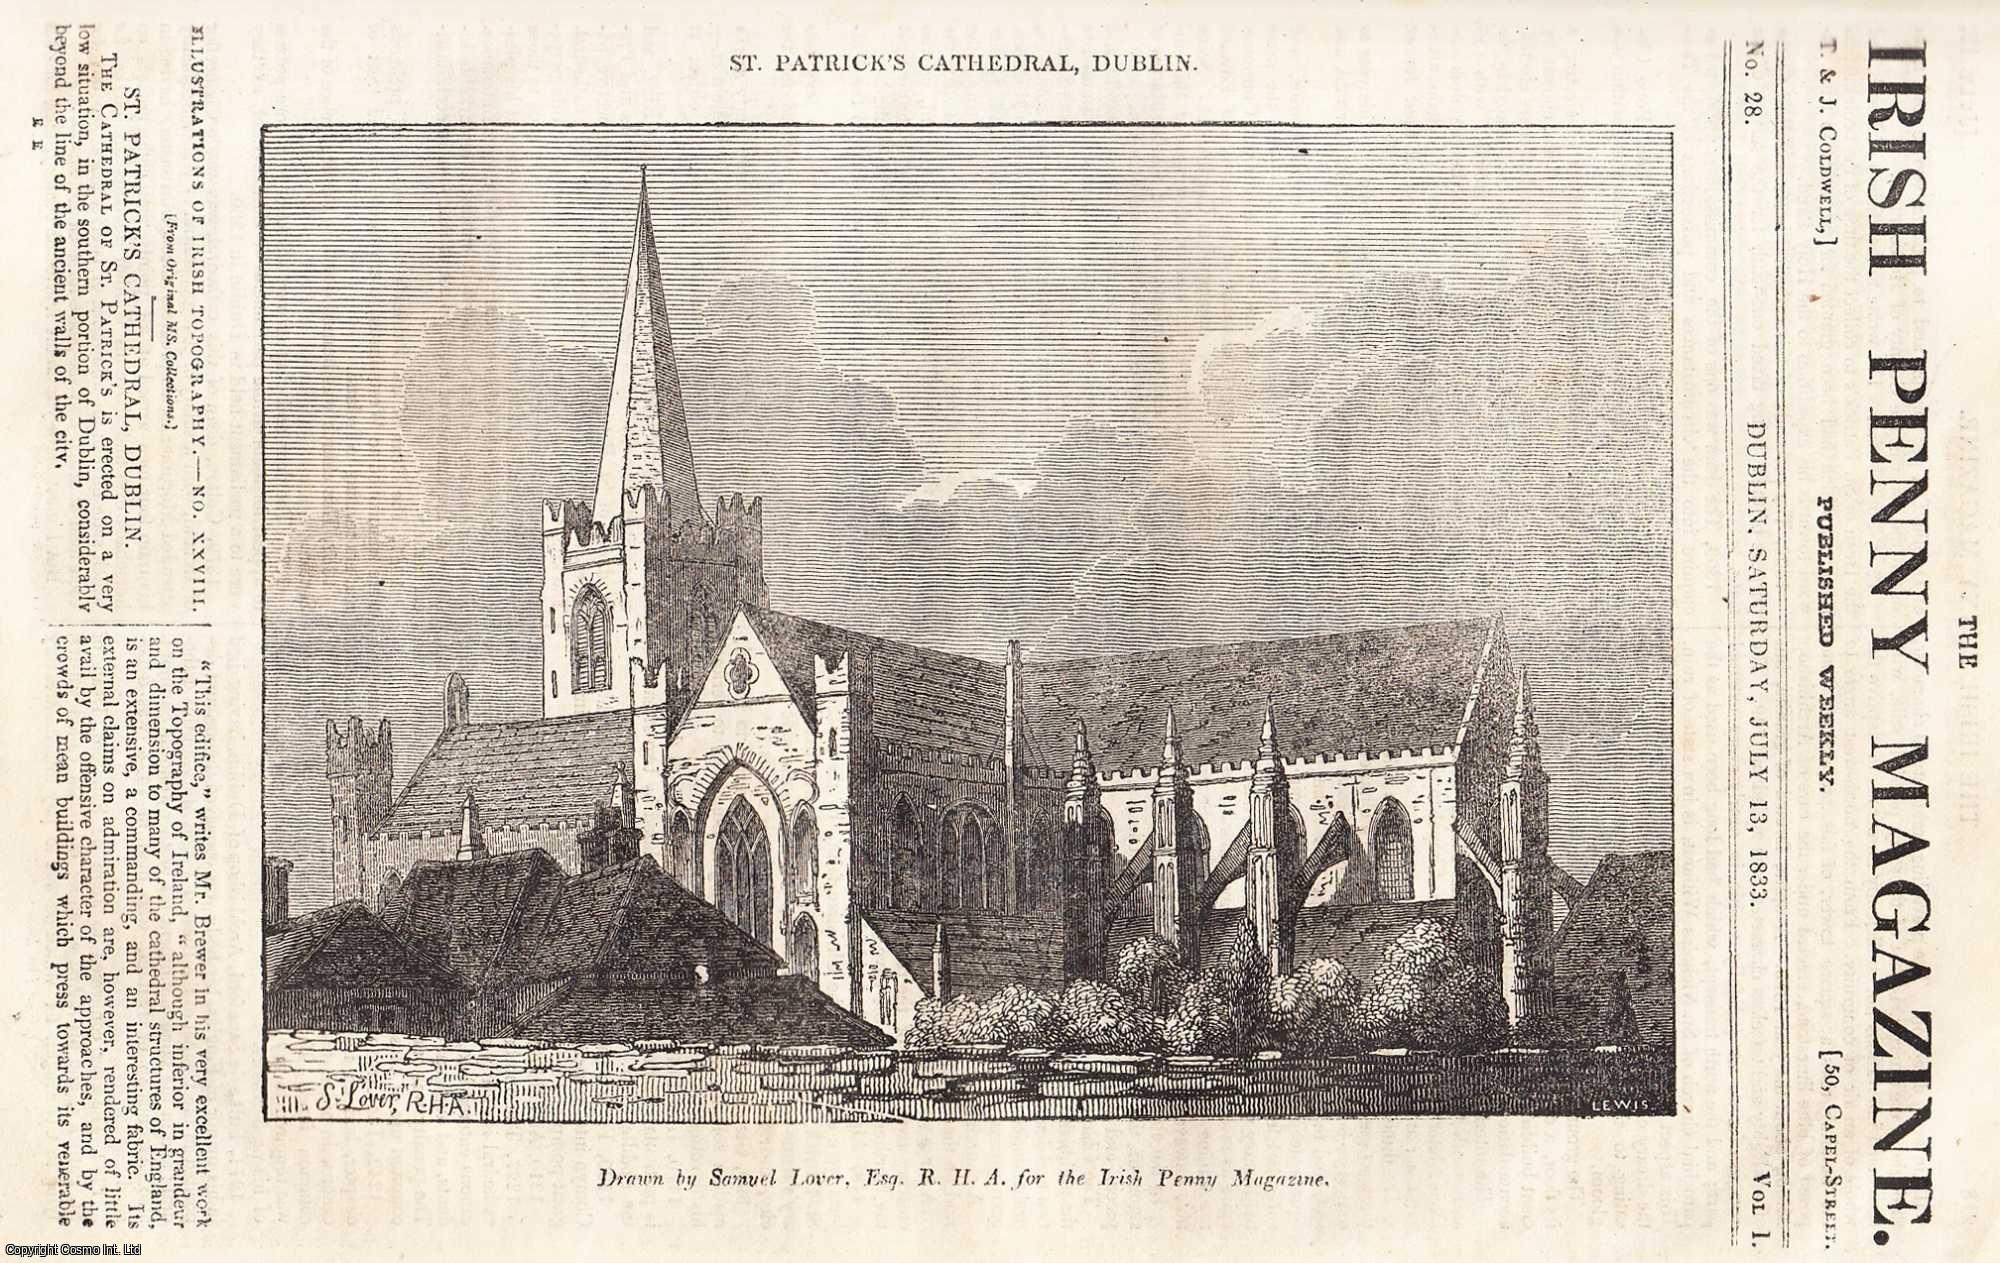 Irish Penny Magazine - 1833, St. Patrick's Cathedral, Dublin. Featured in a full weekly issue of the uncommon Irish Penny Magazine, 1833.